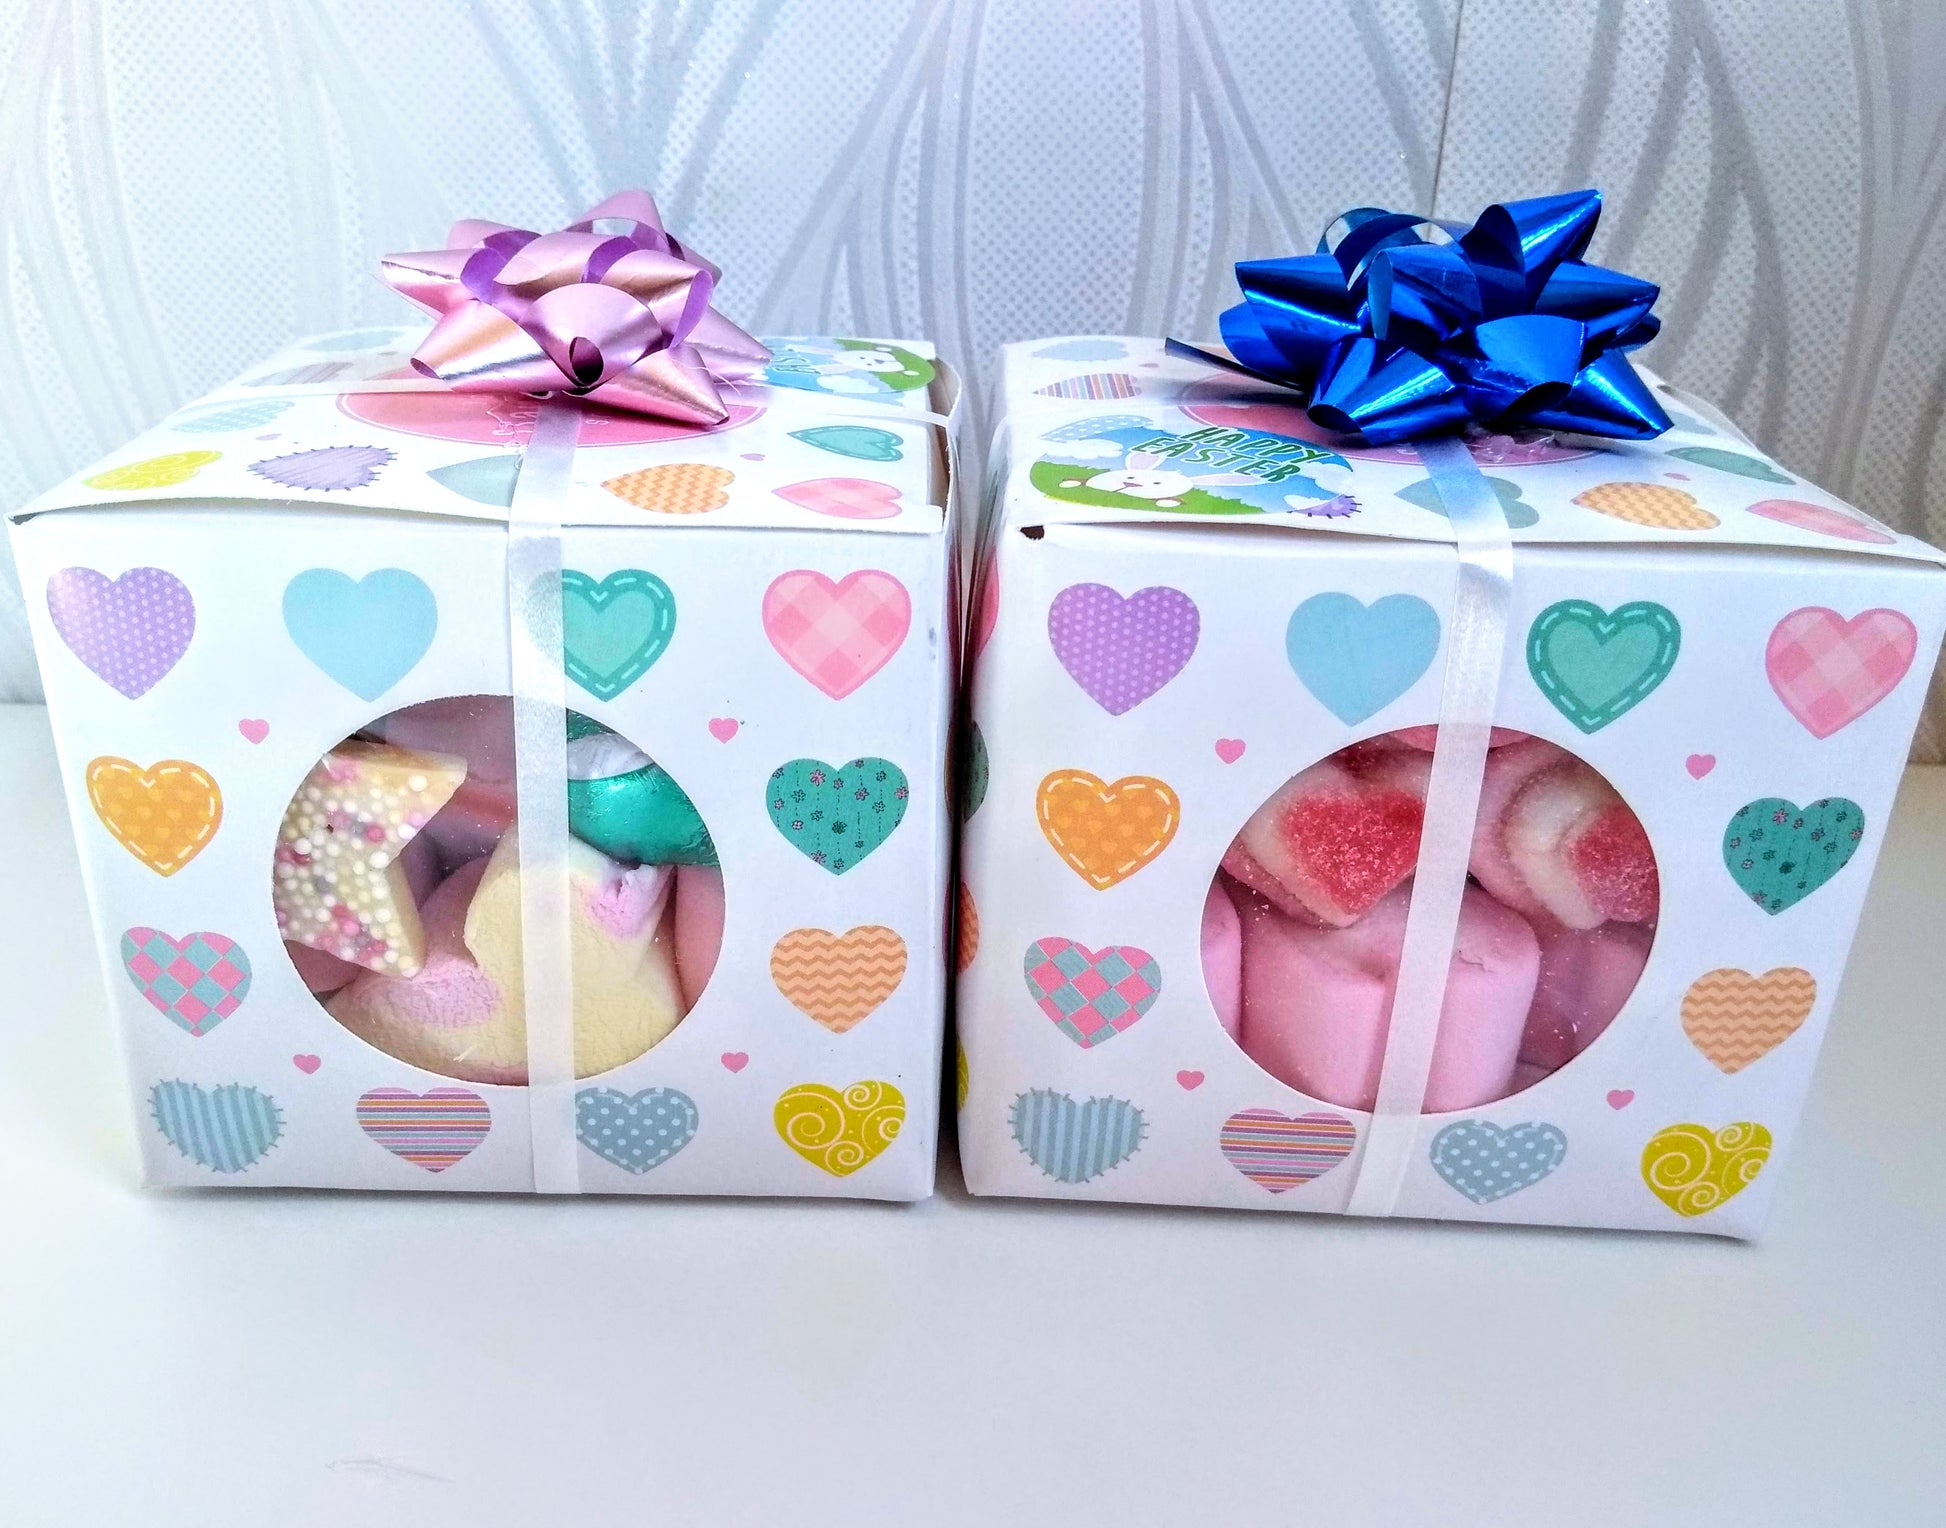 Yummy Sweet Boxes from UK's Best online seller